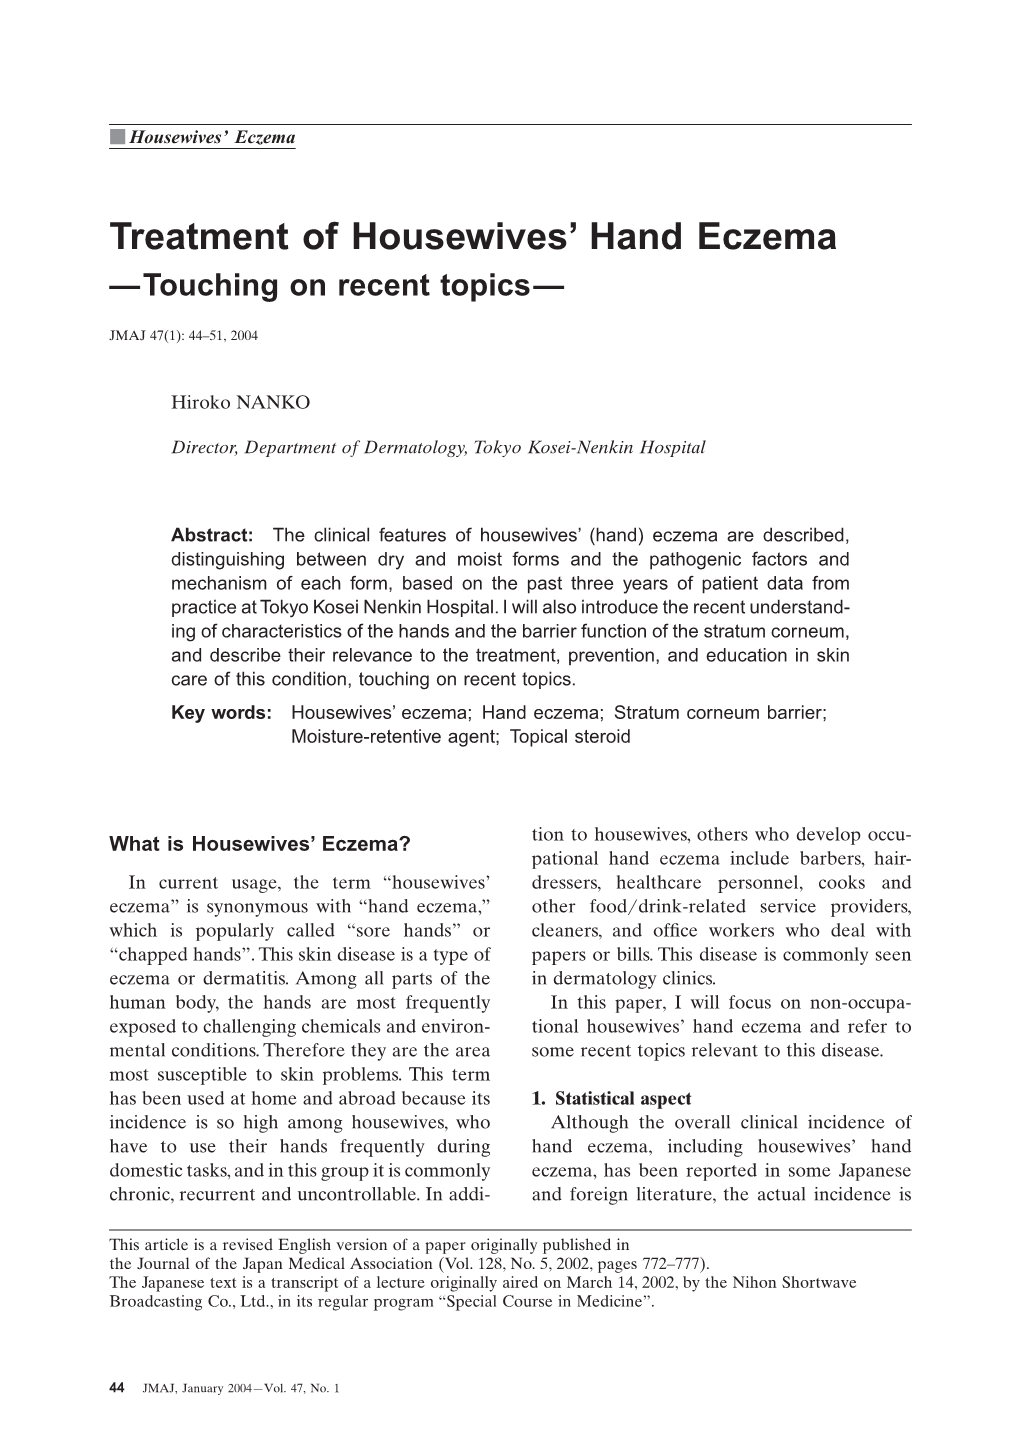 Treatment of Housewives' Hand Eczema